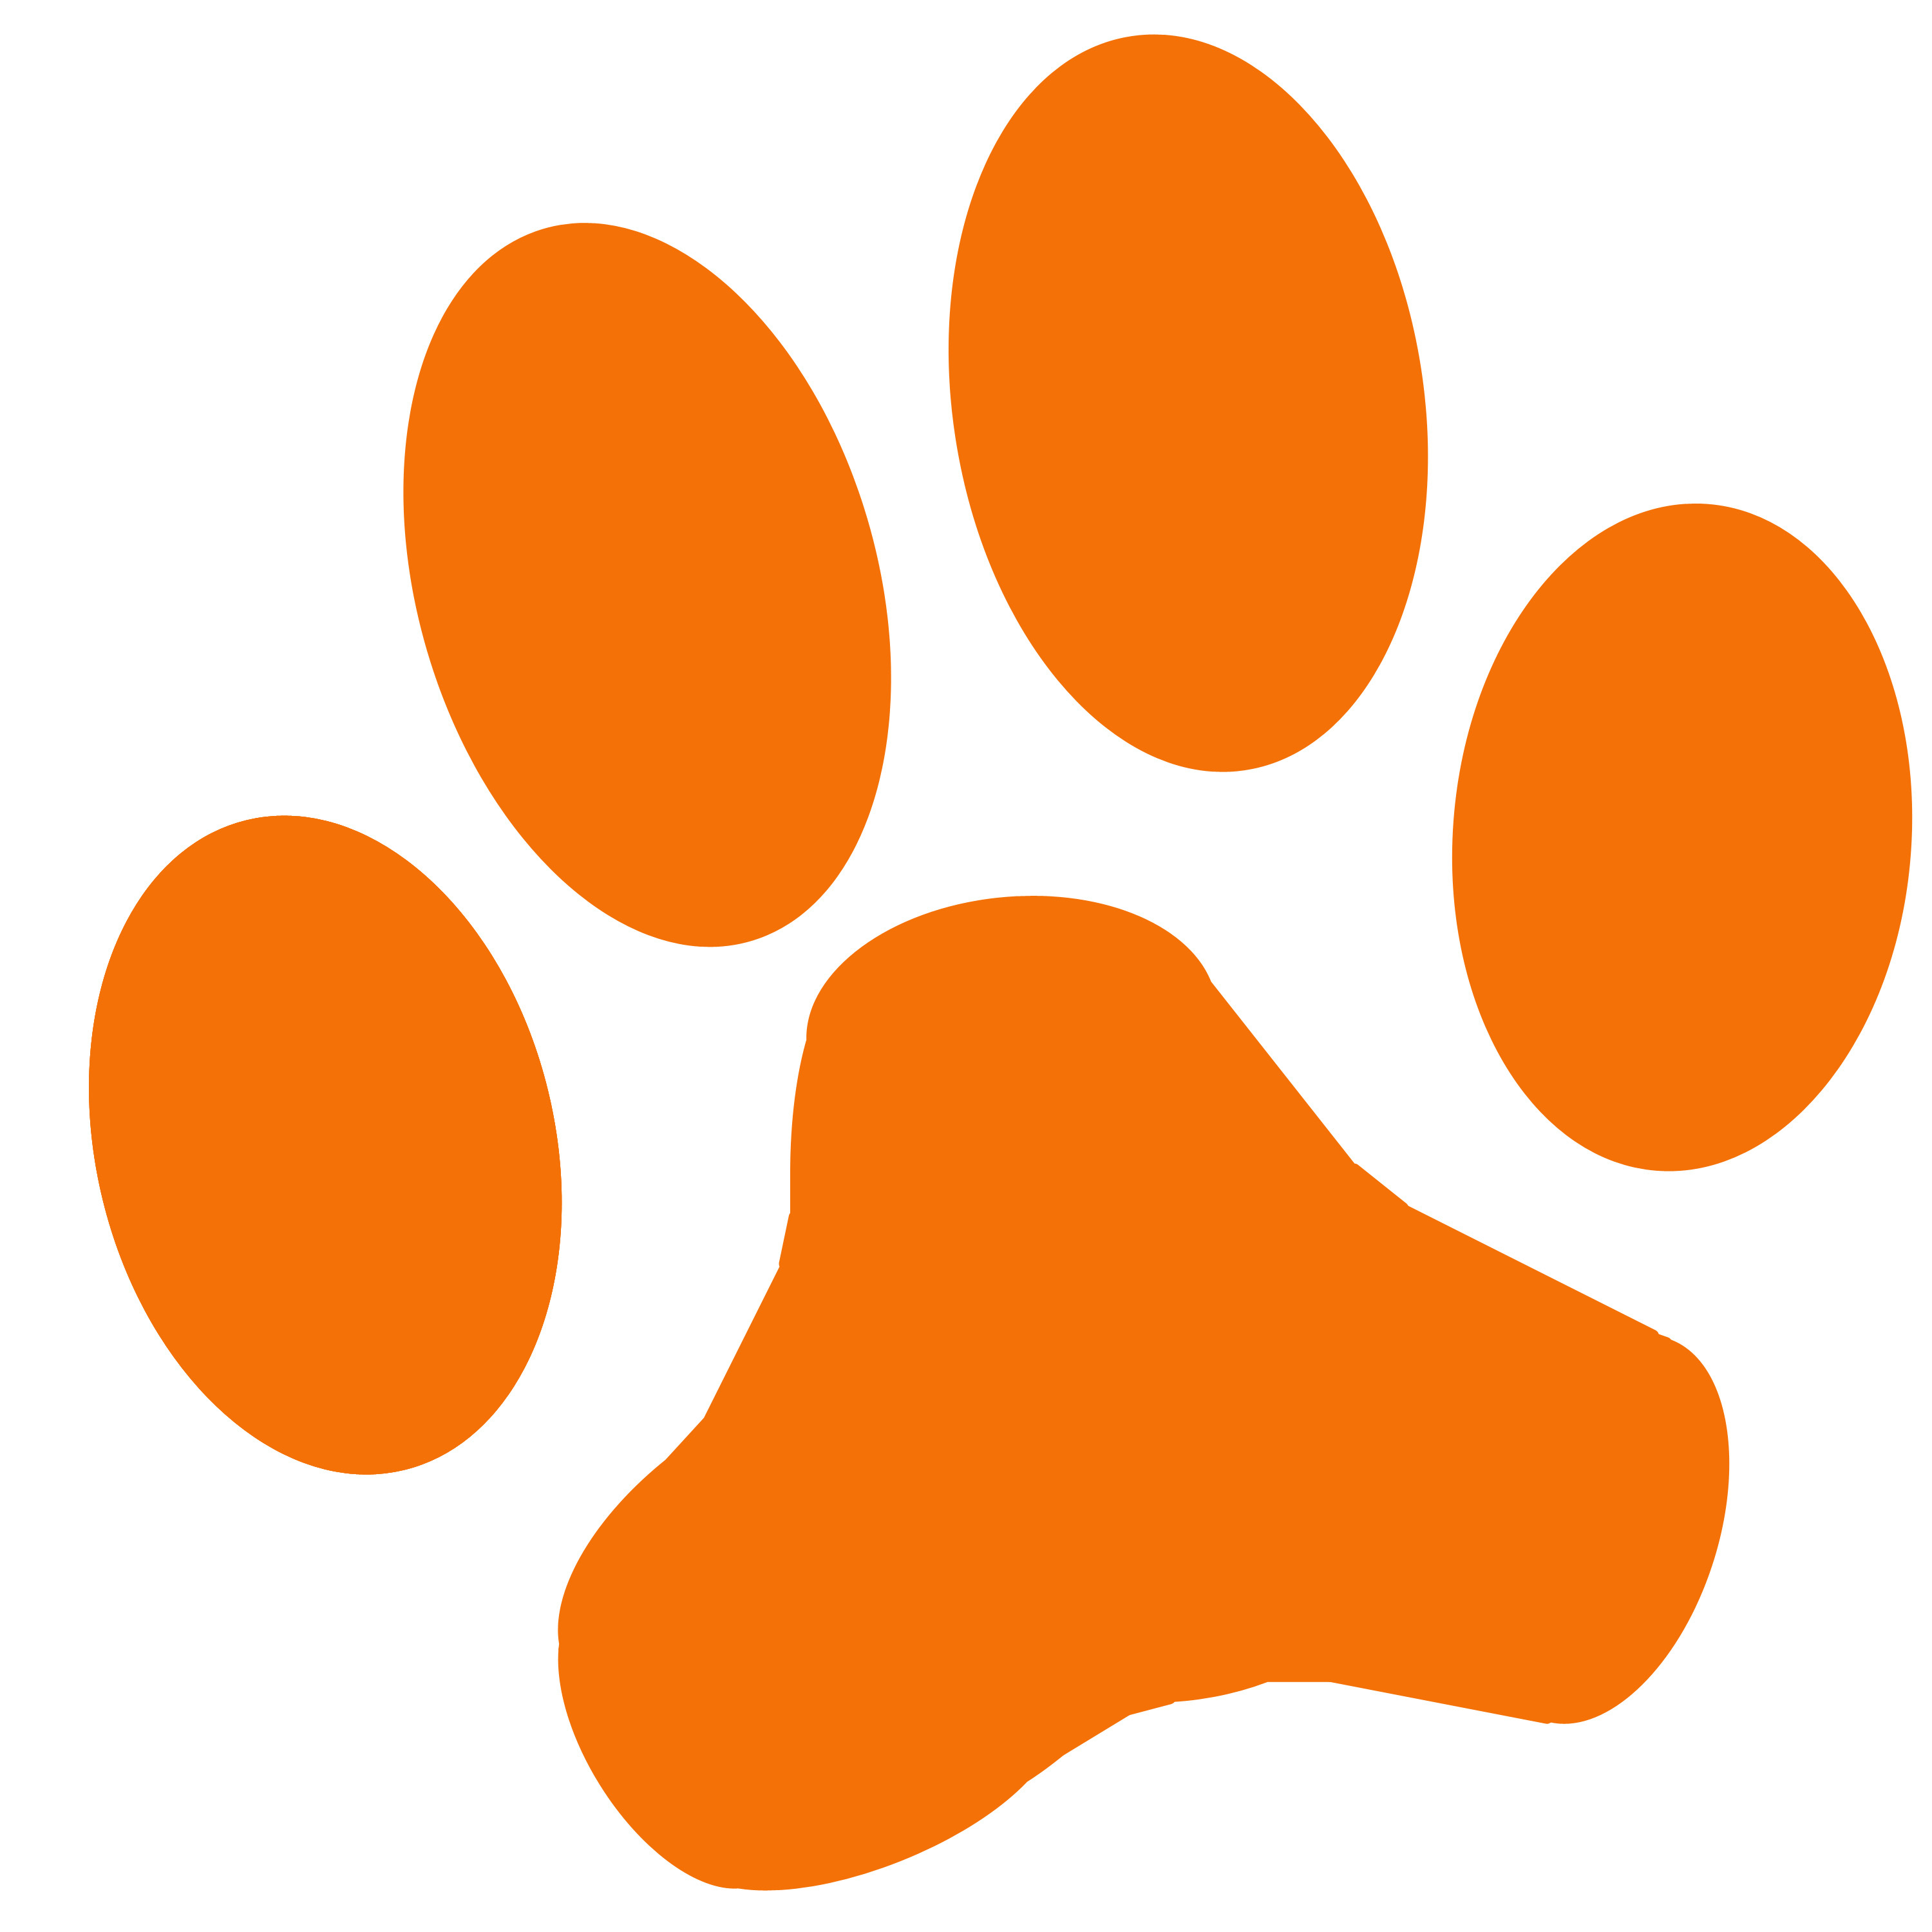 Free Dog Paw Vector, Download Free Dog Paw Vector png images, Free ...